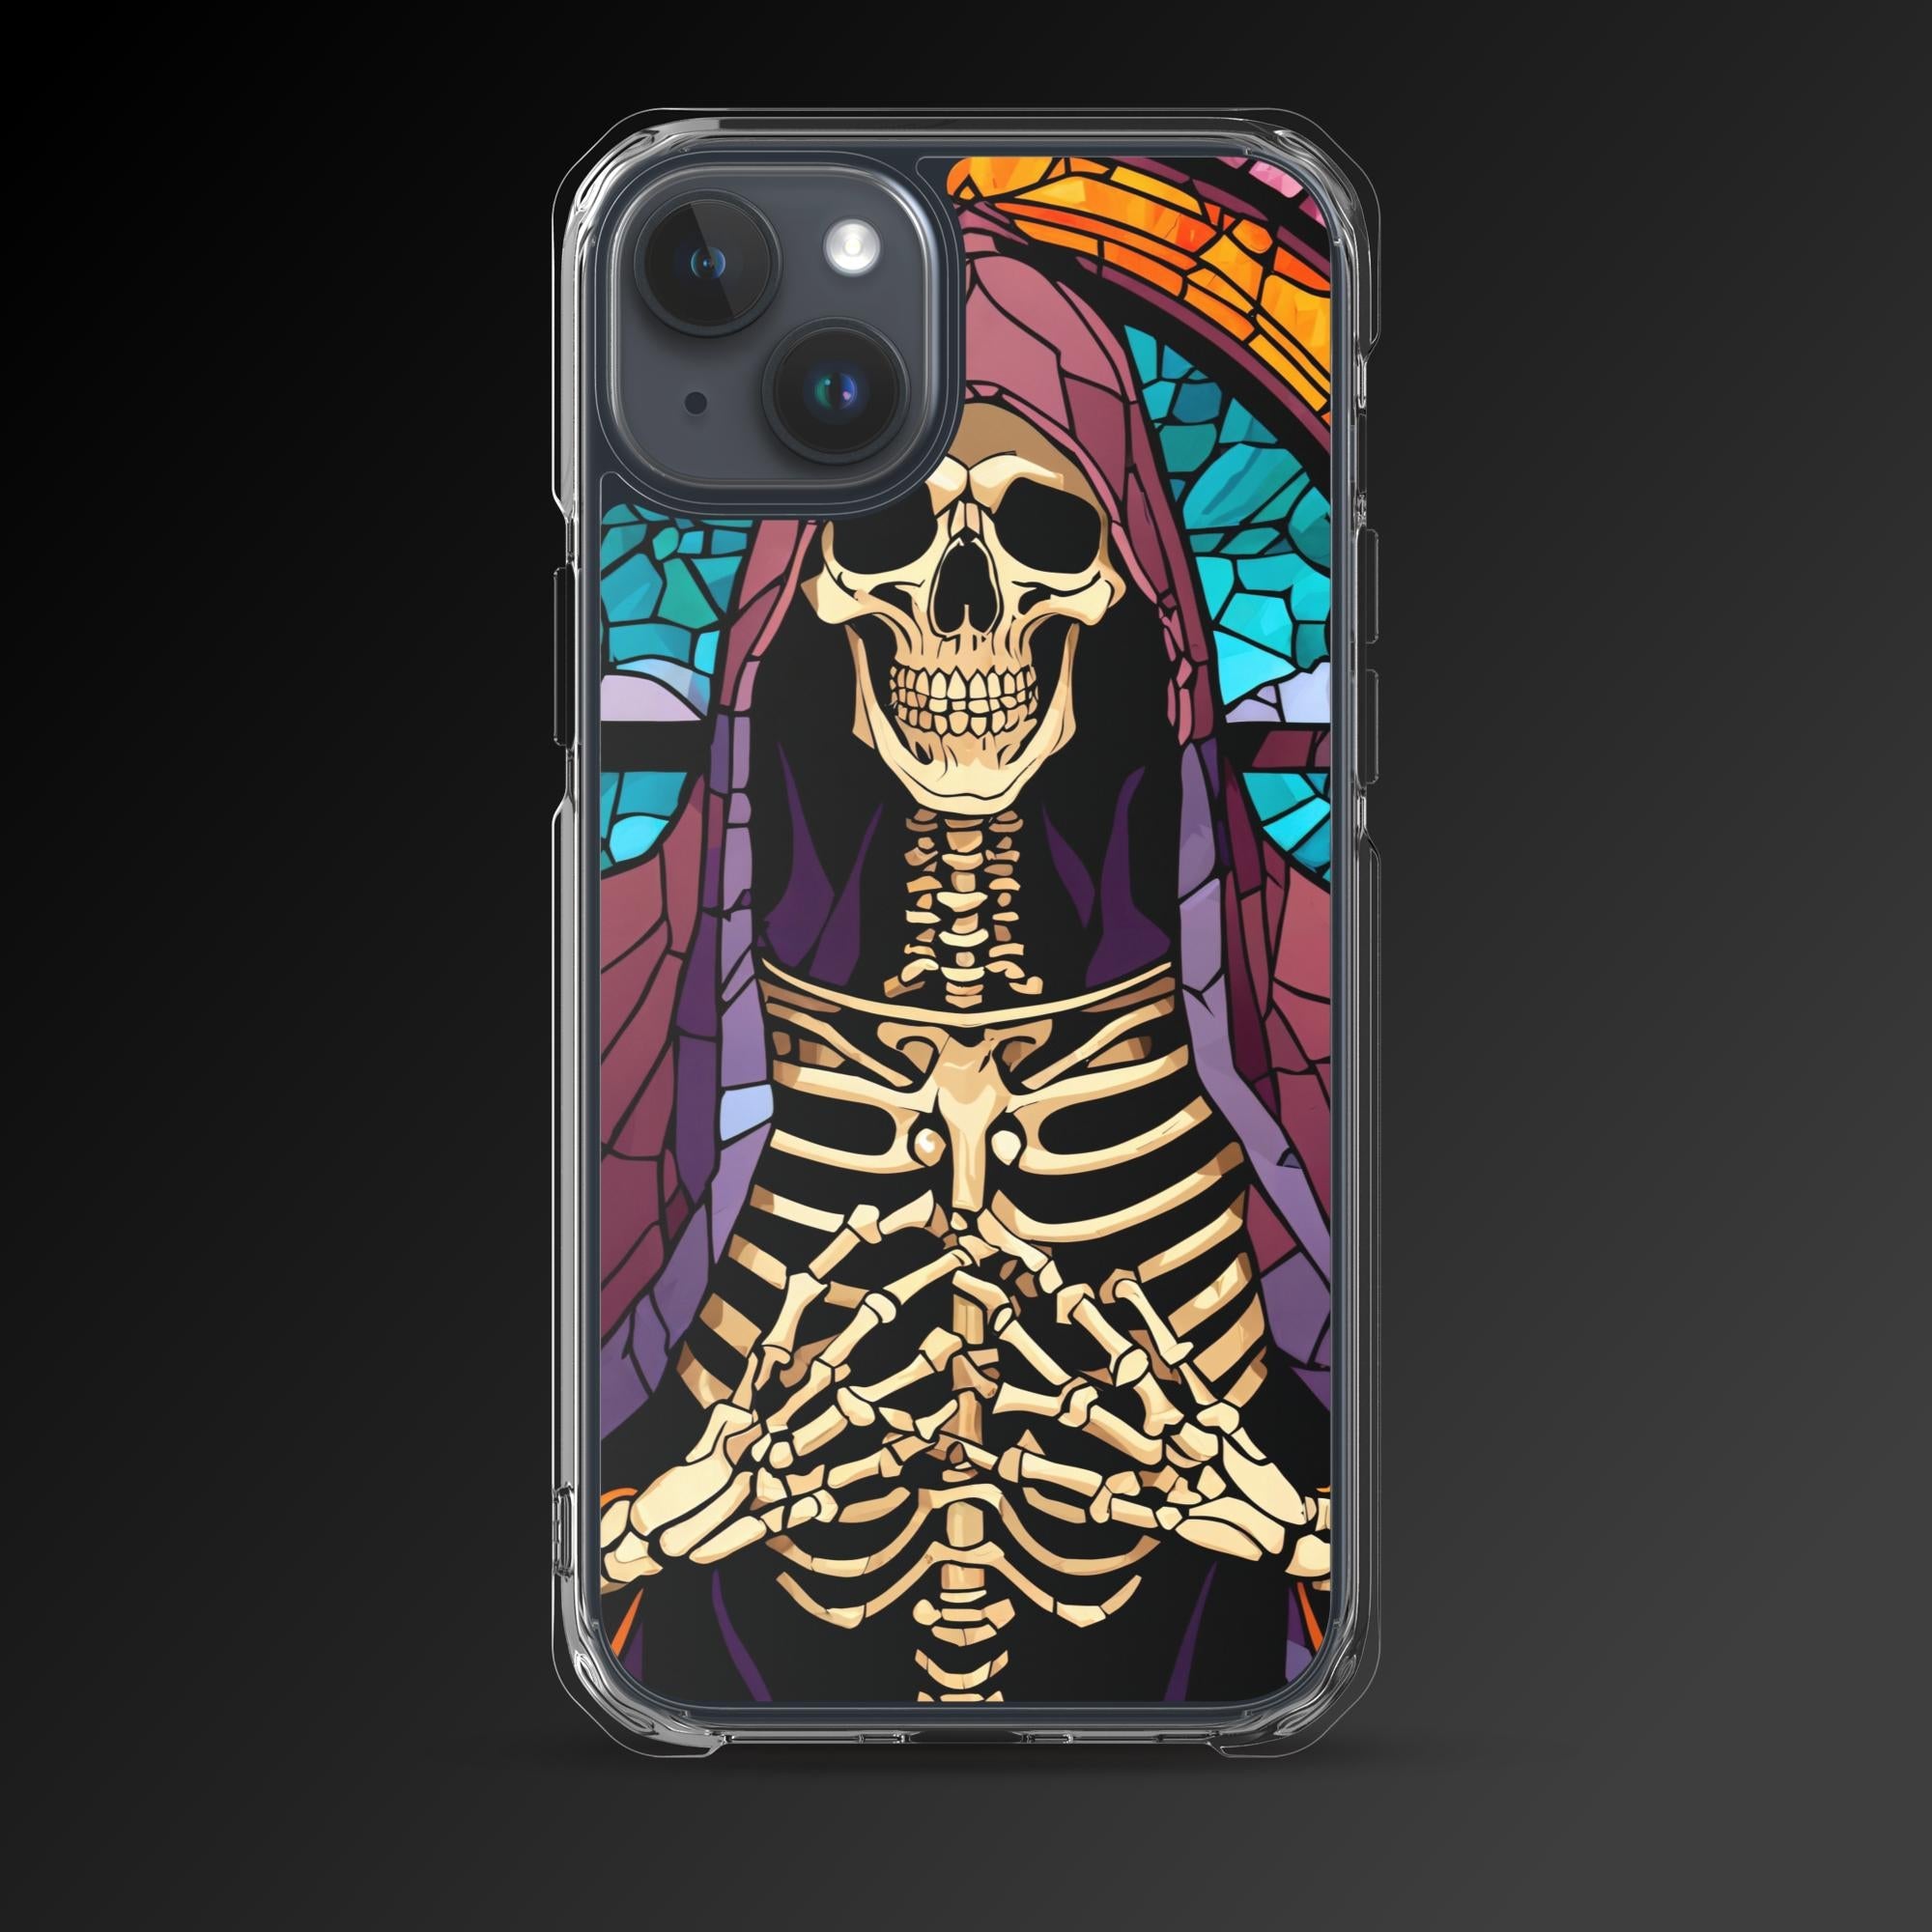 "Undead prayer" clear iphone case - Clear iphone case - Ever colorful